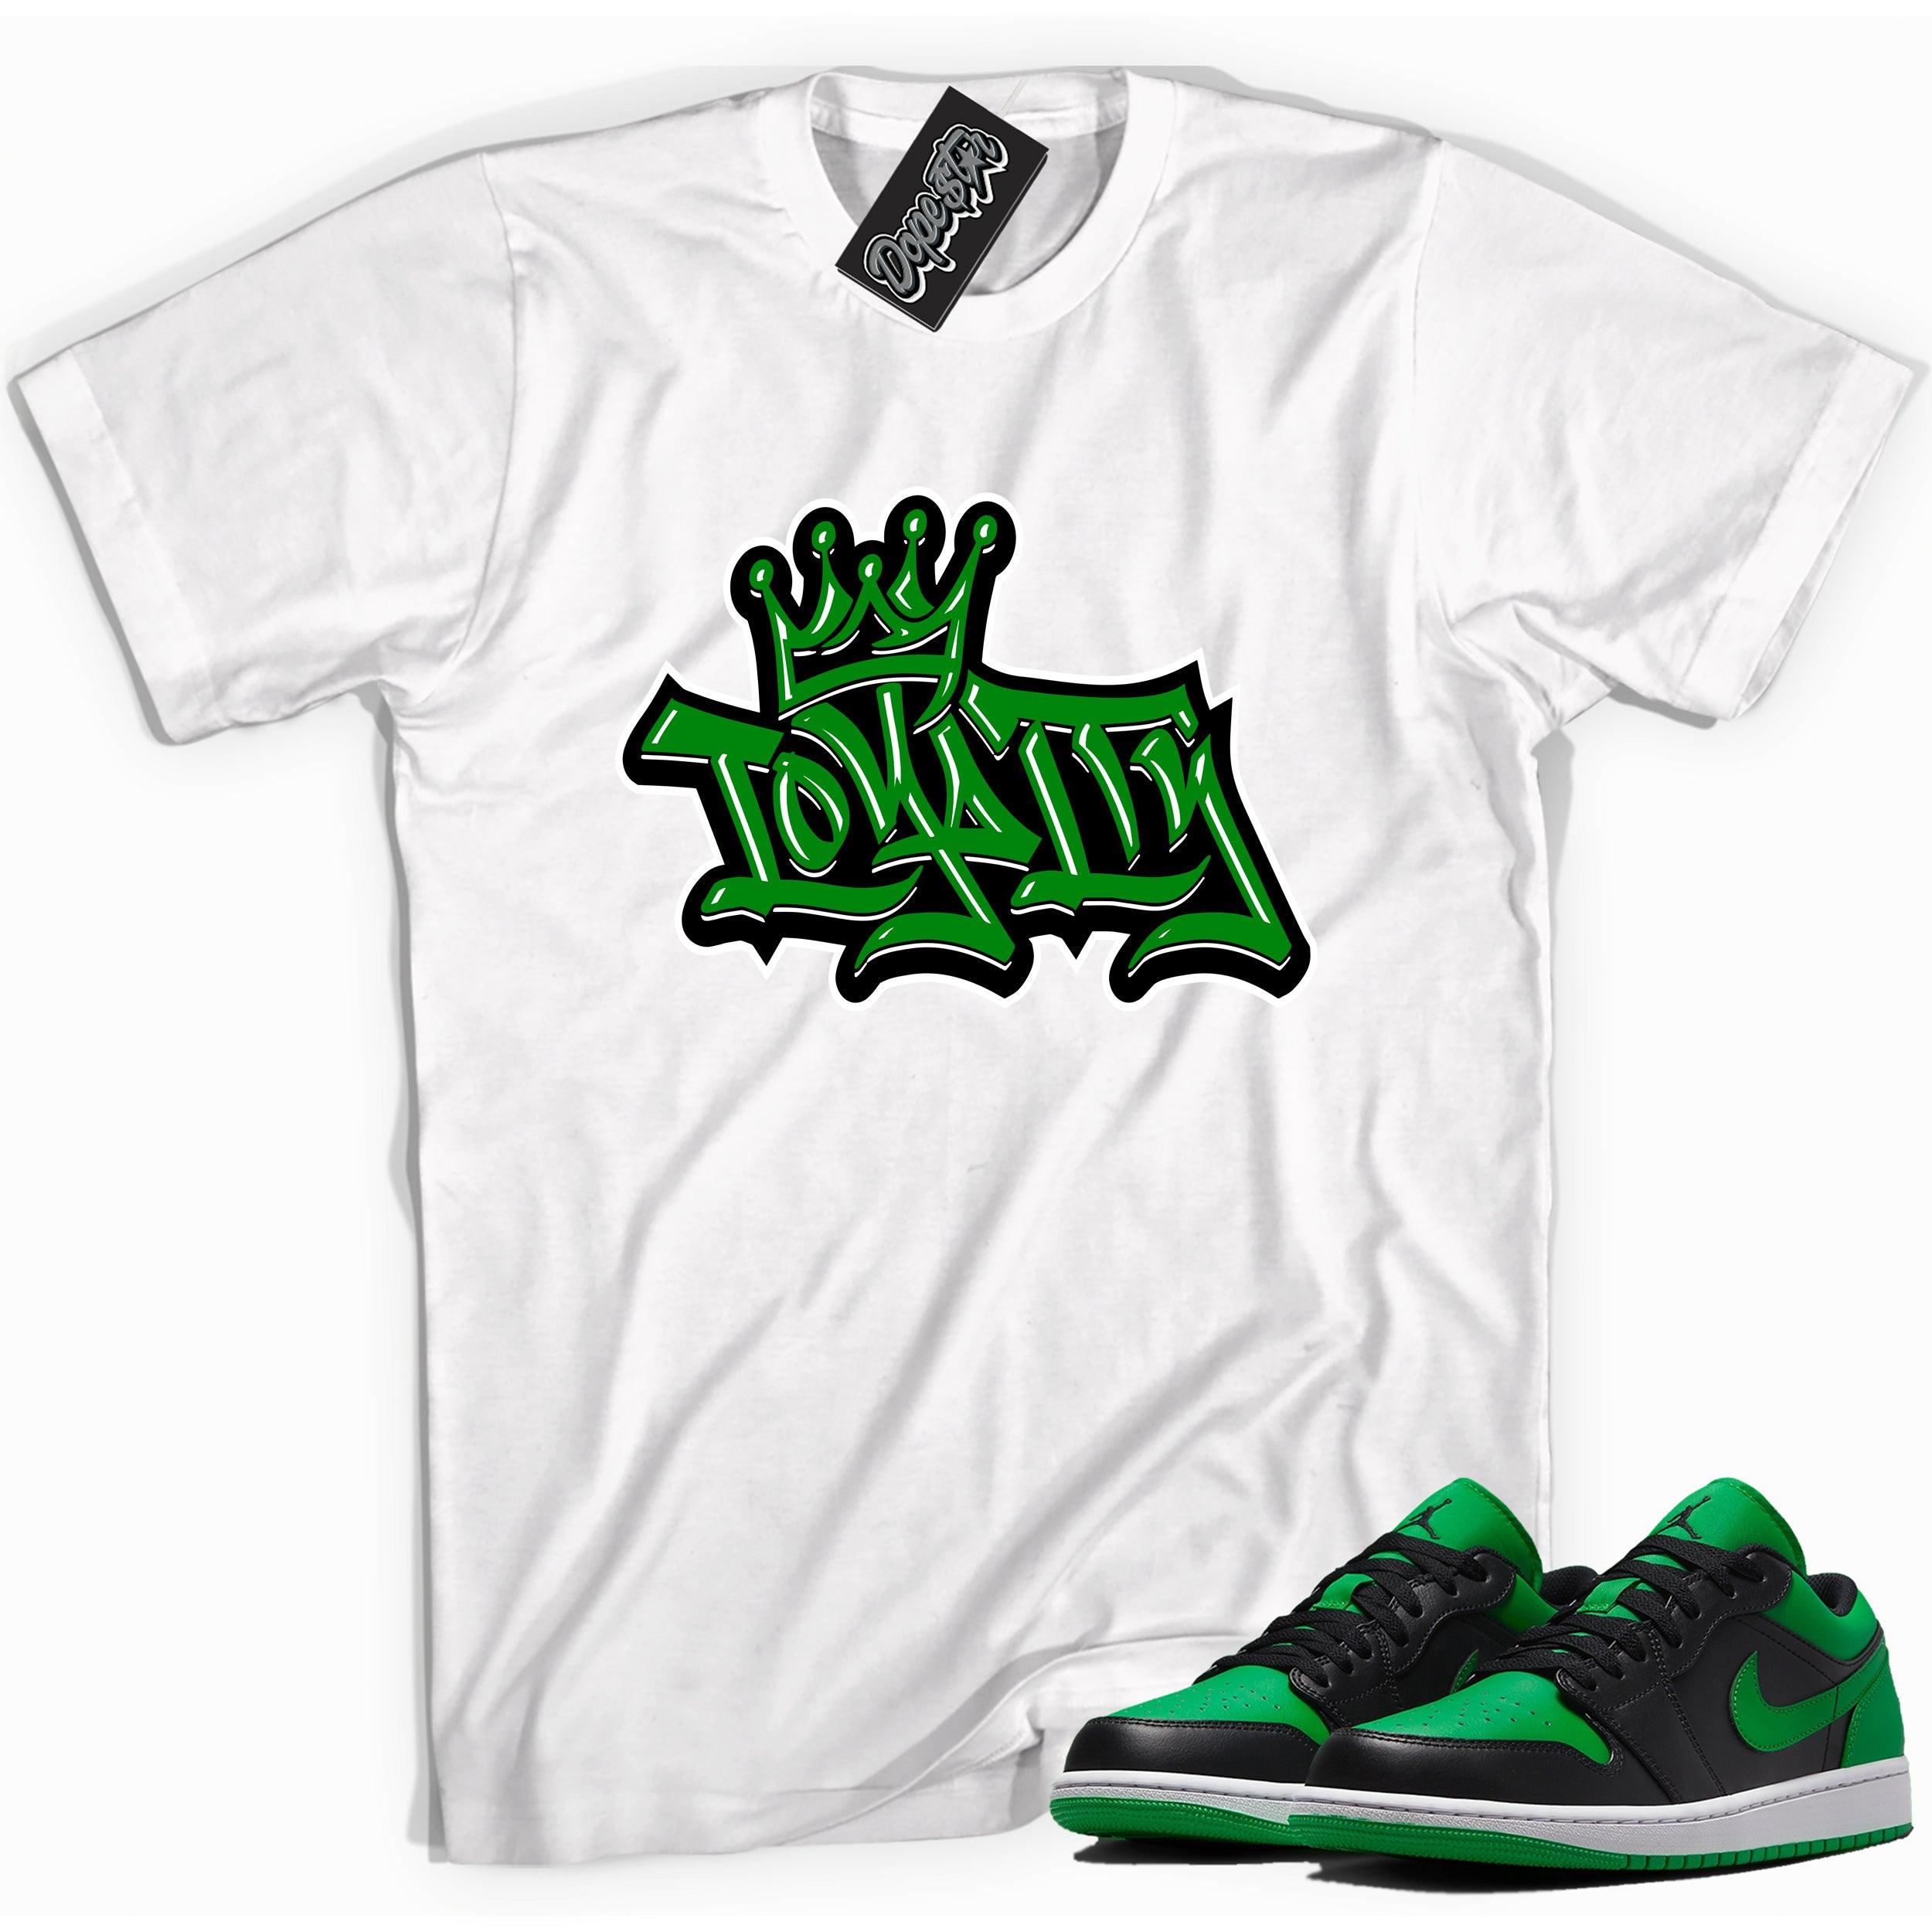 Cool white graphic tee with 'loyalty' print, that perfectly matches Air Jordan 1 Low Lucky Green sneakers